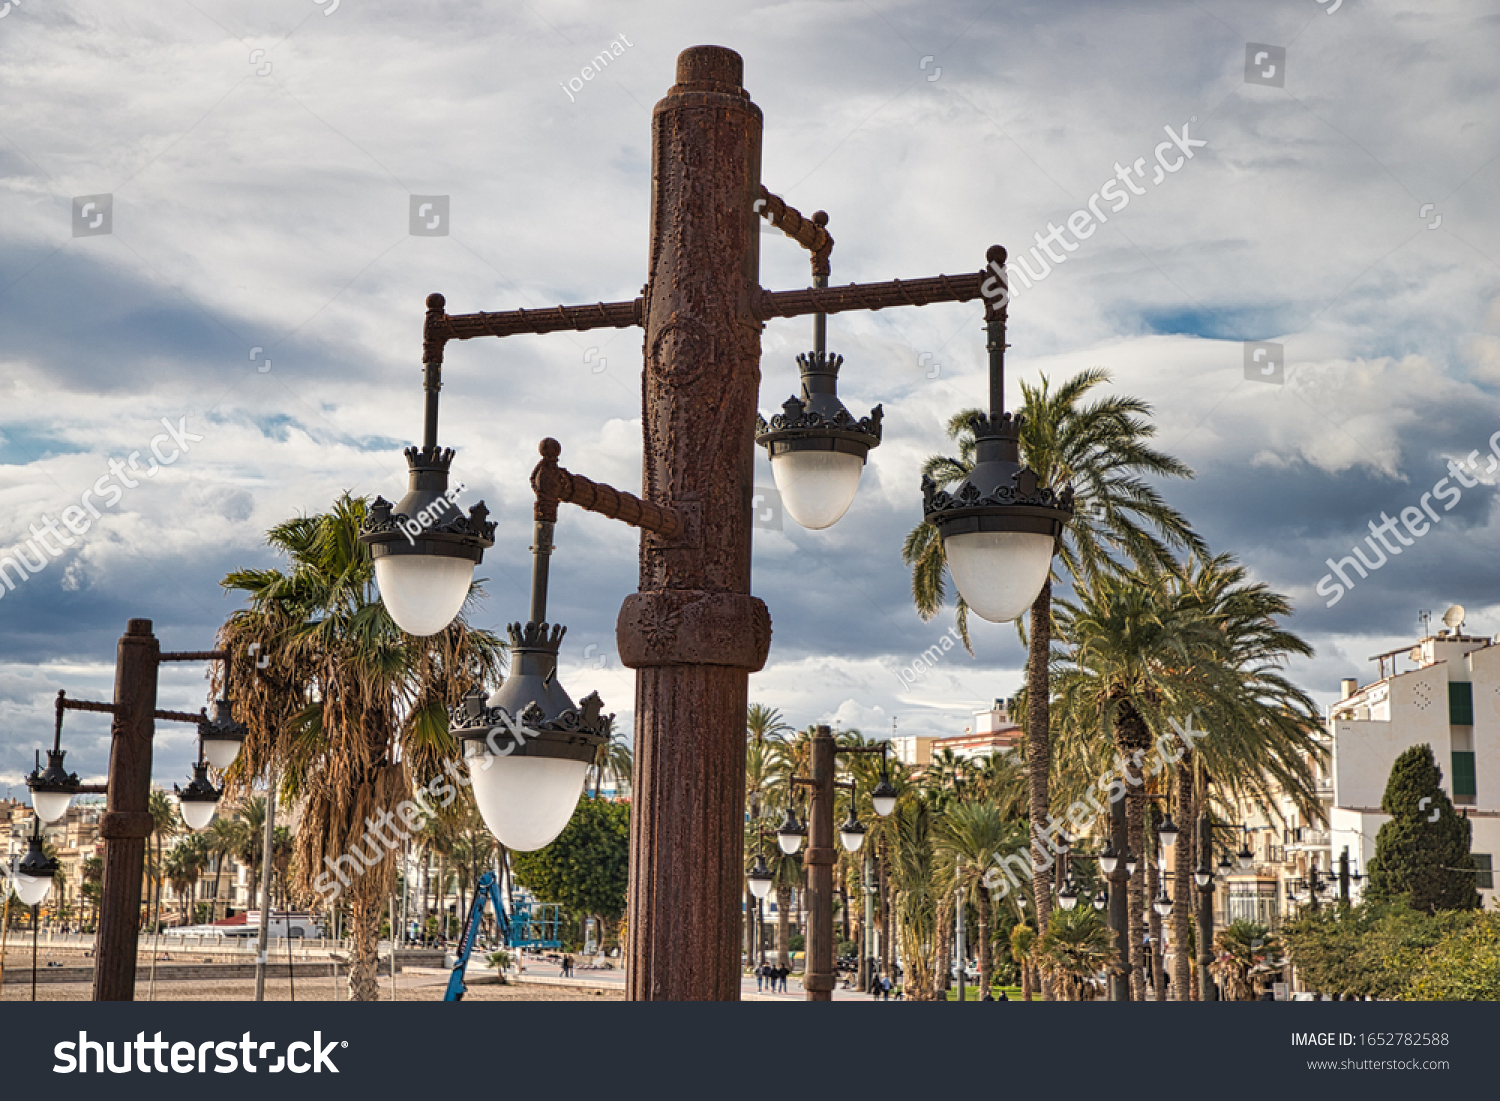 Light pole in Sitges Spain #1652782588